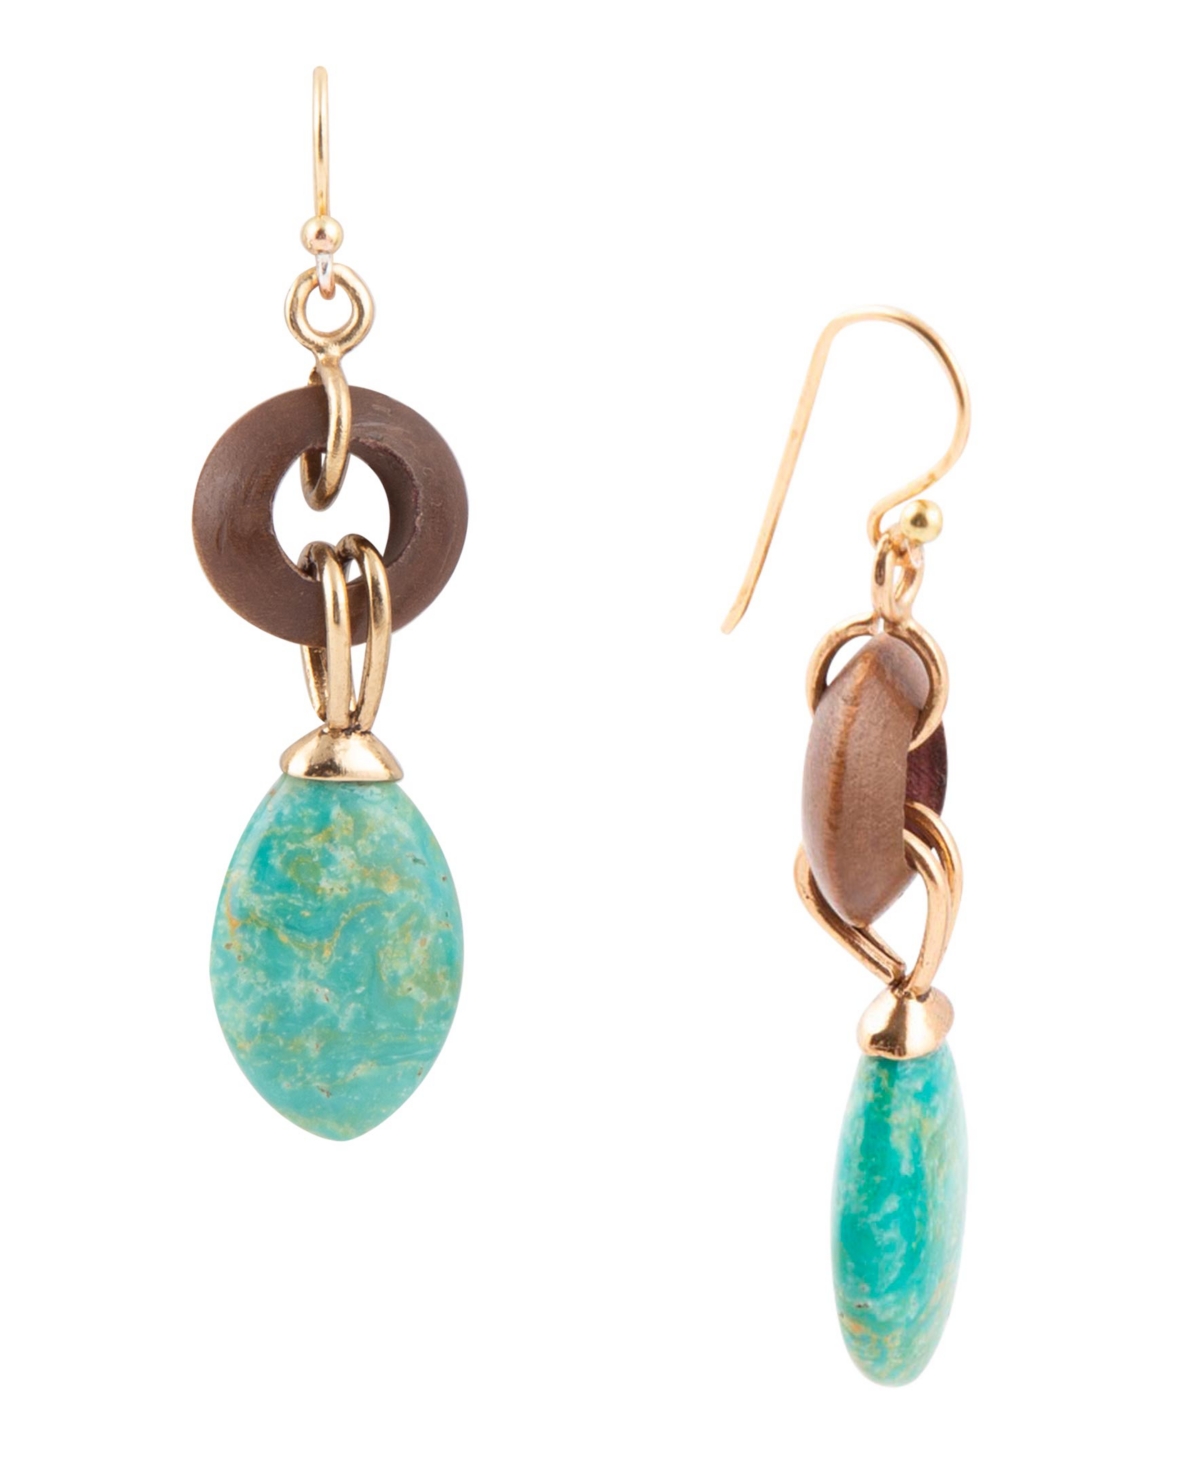 Barse Precious Genuine Green Turquoise And Wood Golden Bronze Oval Earrings